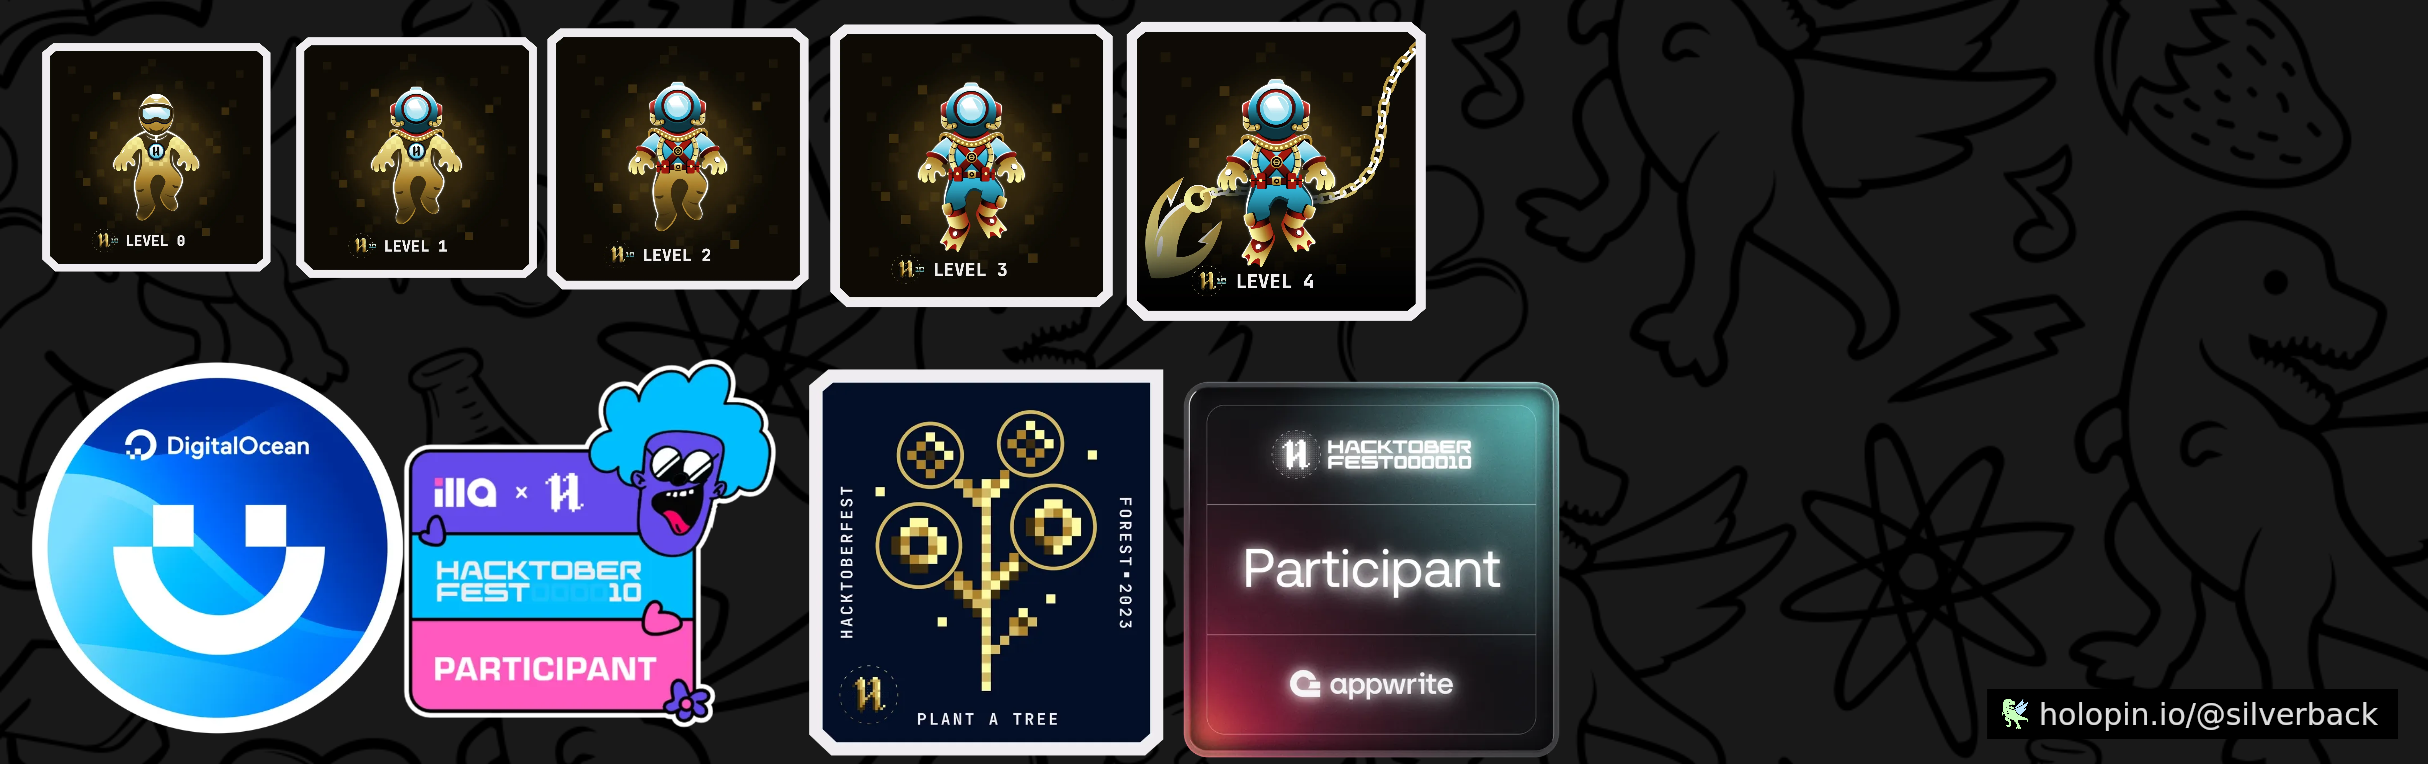 An image of @silverback's Holopin badges, which is a link to view their full Holopin profile